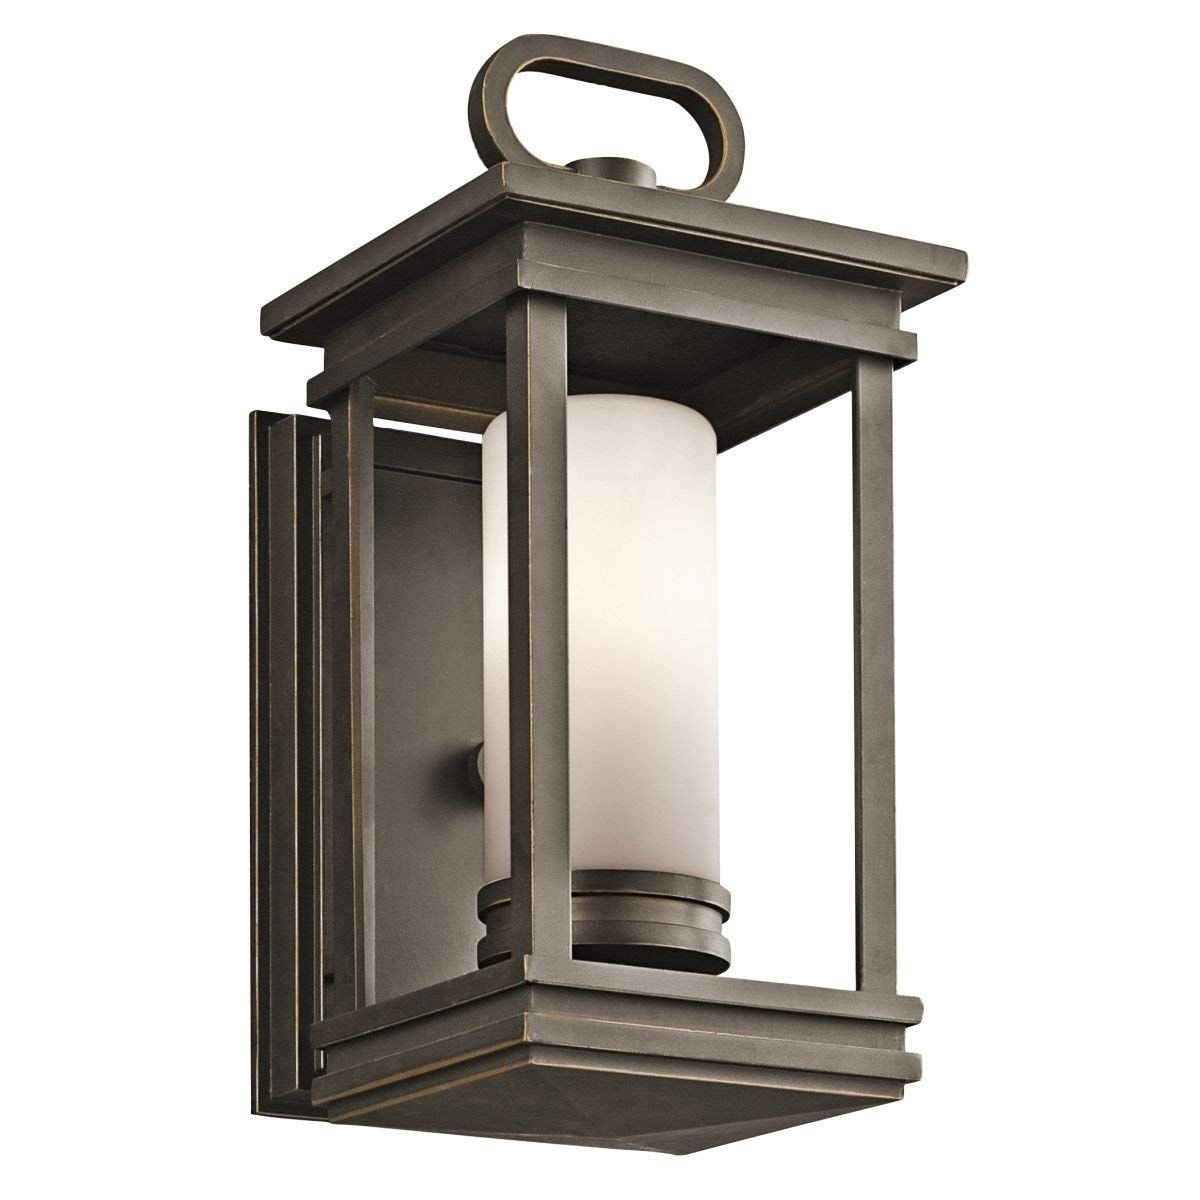 Kichler 49474rz South Hope 1 Light 11.75" Small Outdoor Wall In Regarding Outdoor Lanterns At Amazon (Photo 8 of 20)